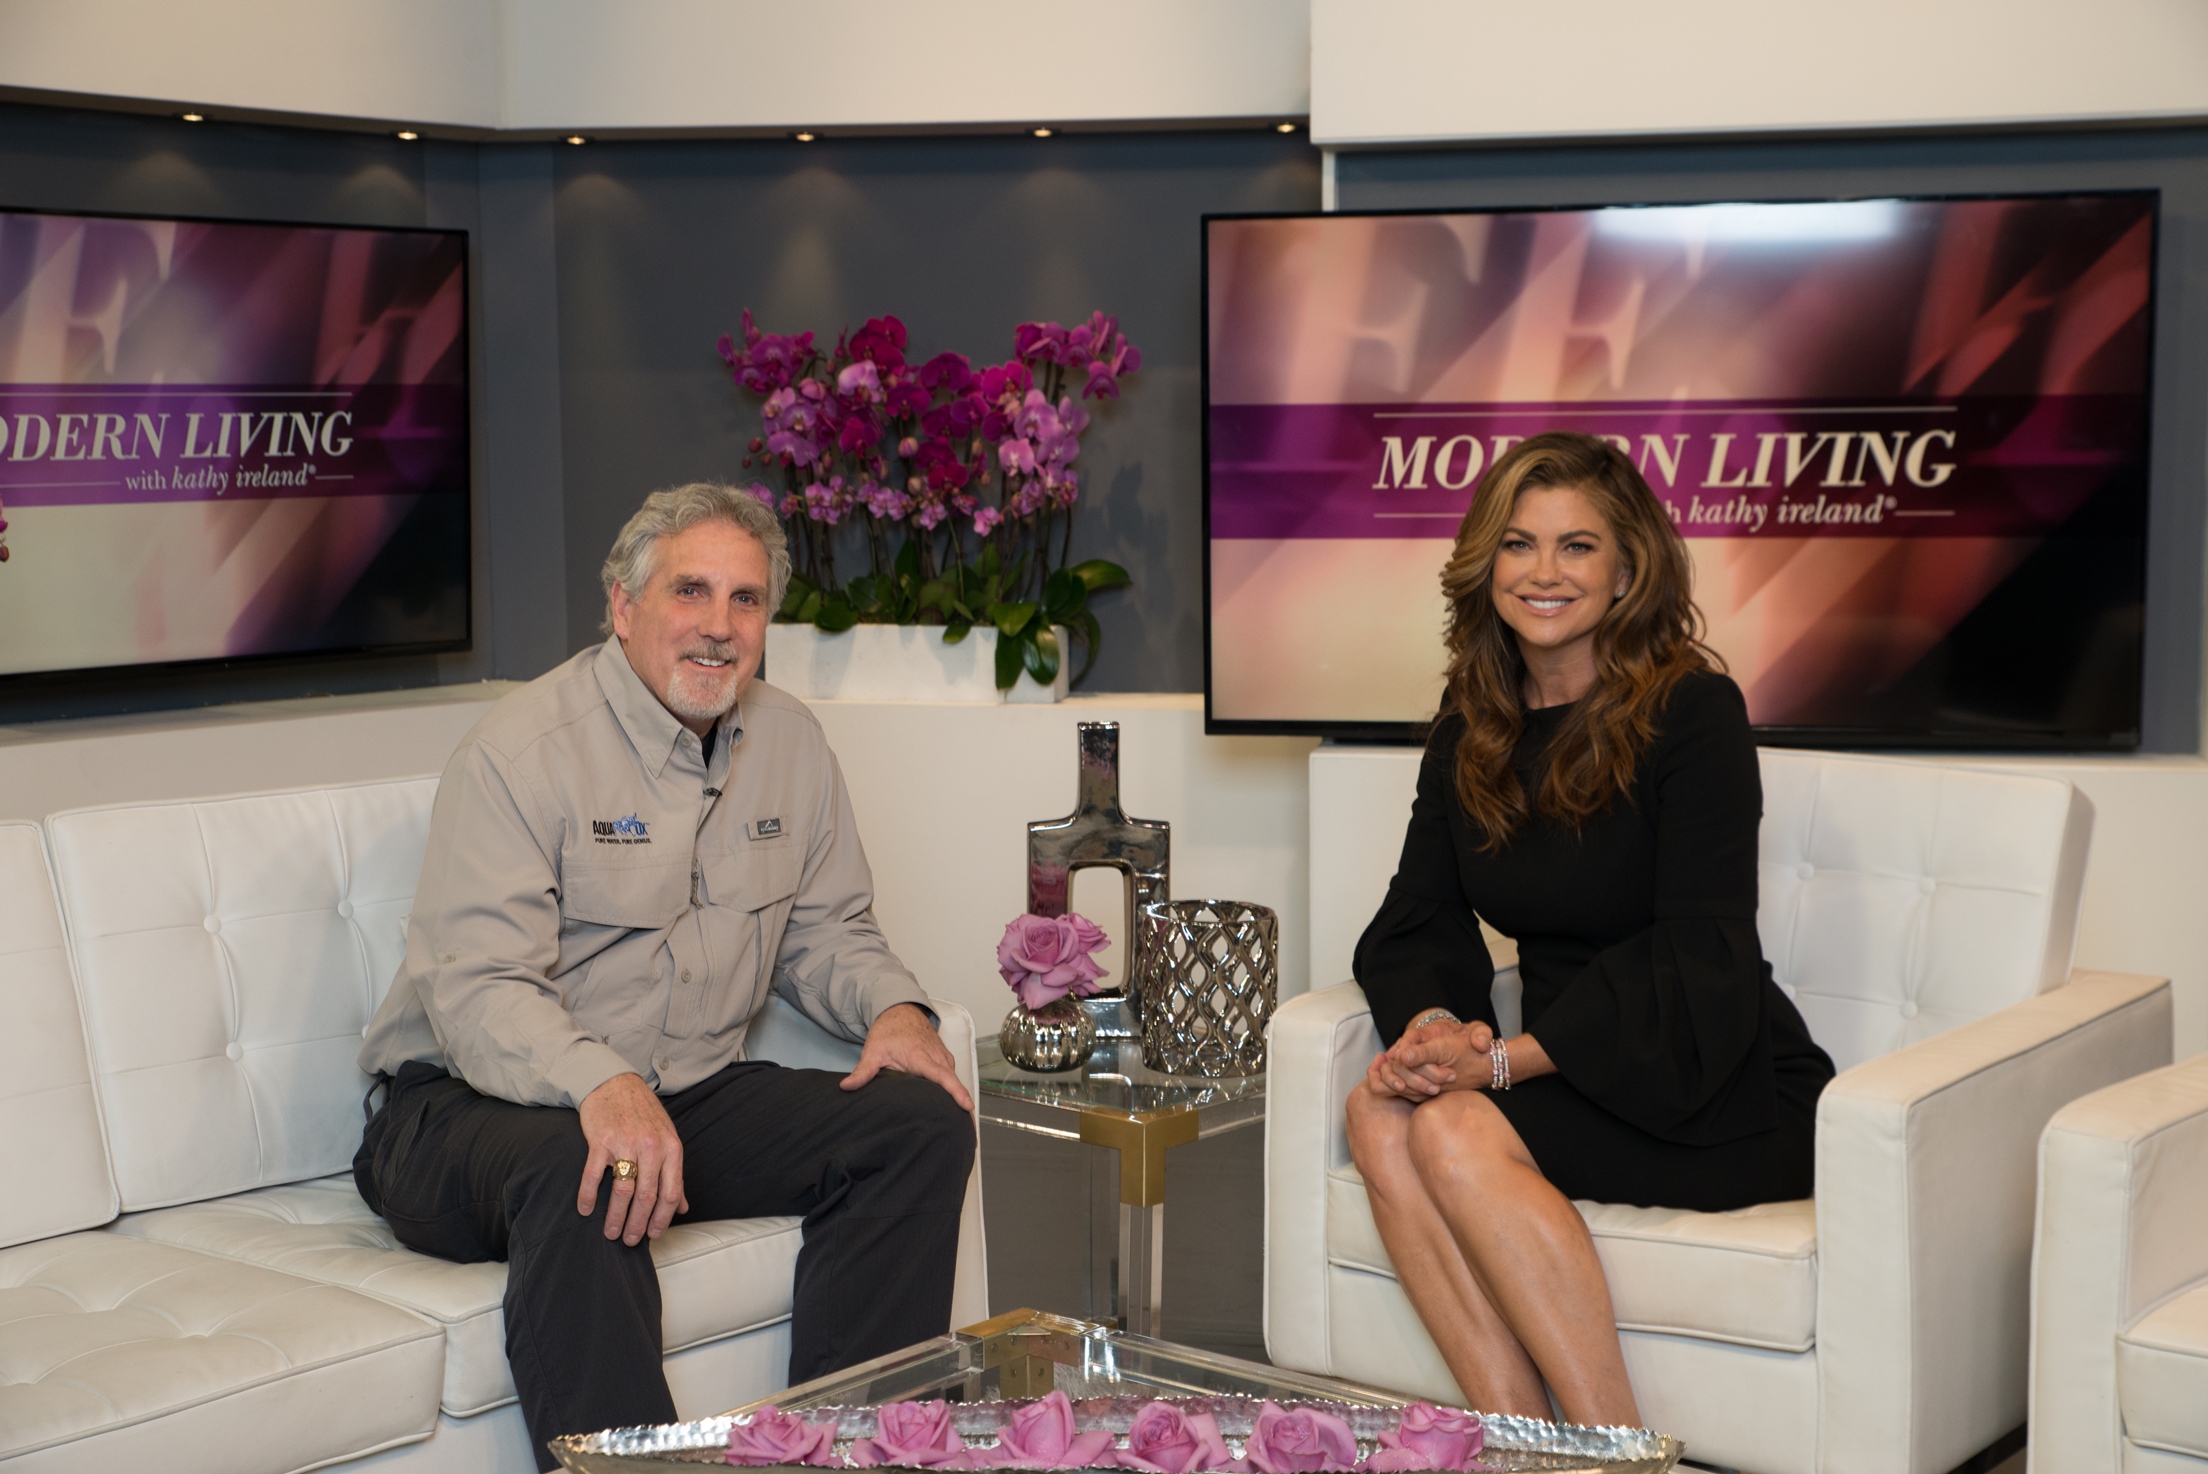 Modern Living with kathy ireland® Showcased Purified Water Systems with AquaOx 2